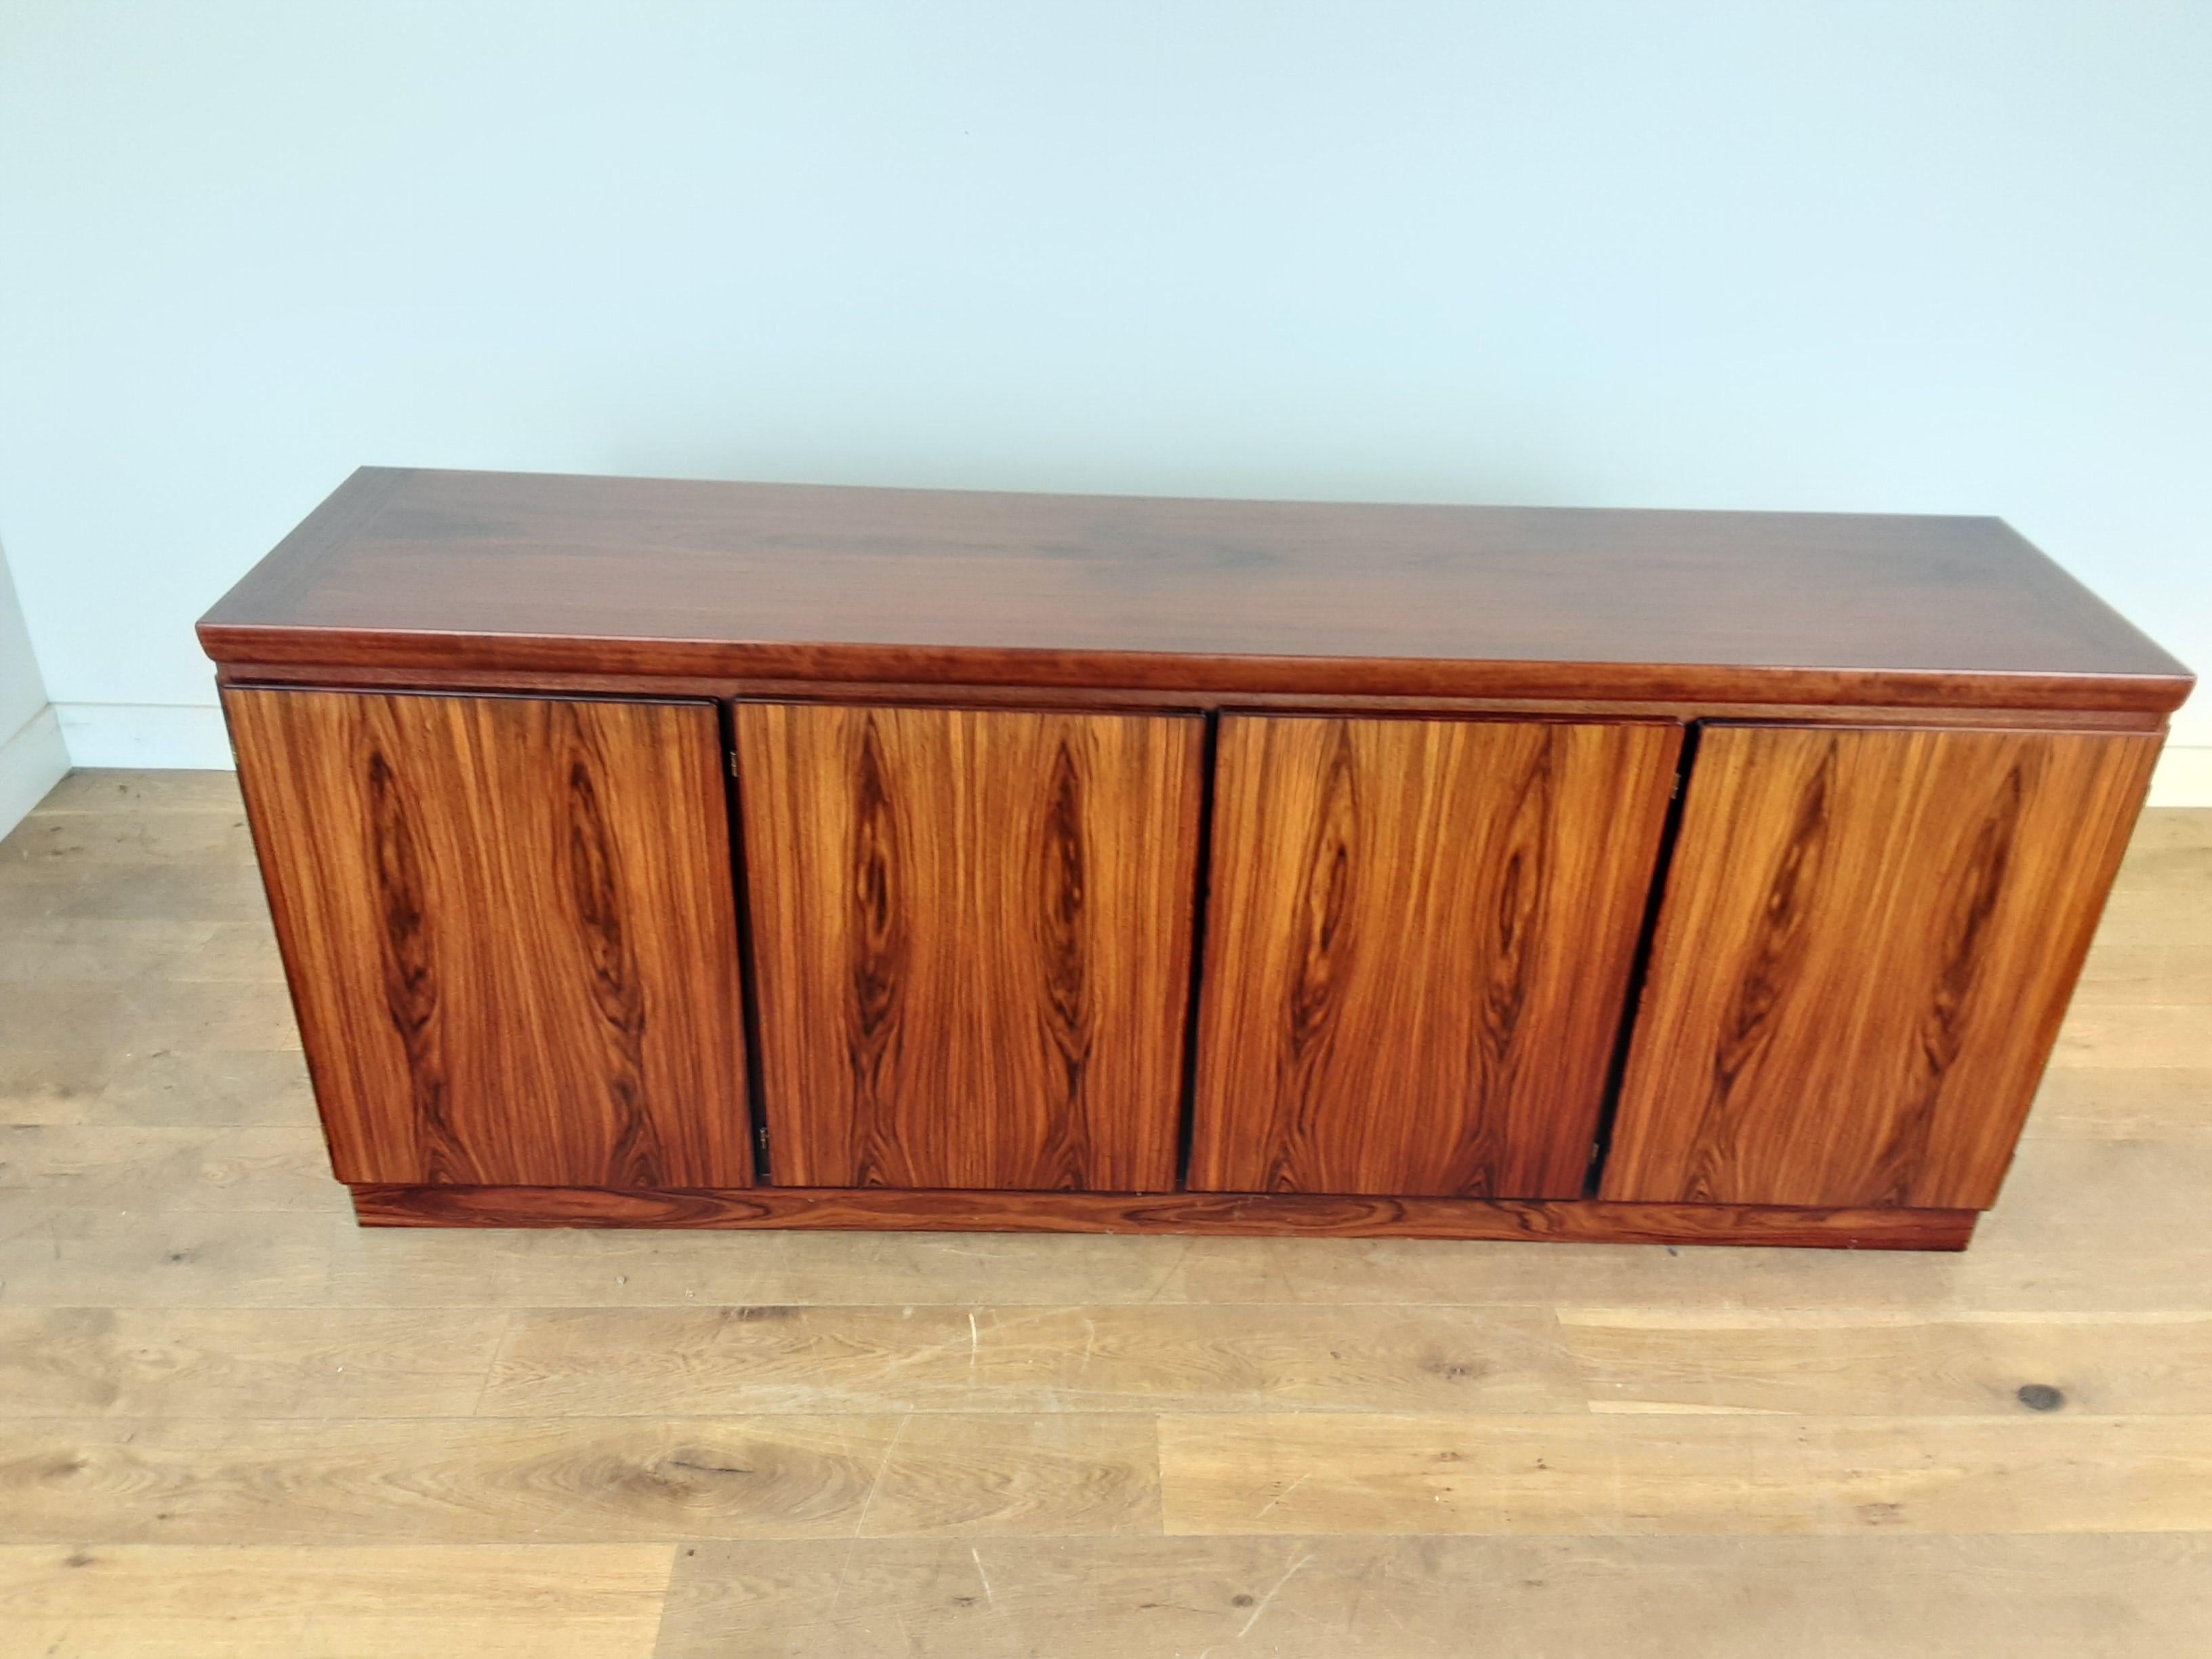 Midcentury sideboard credenza
Midcentury rosewood sideboard.
Very smart Danish sideboard by Dyrlund in a stunning rosewood.
The left side cupboard conceals a bank of six drawers, the other cupboards concealing shelved storage.
Danish, circa